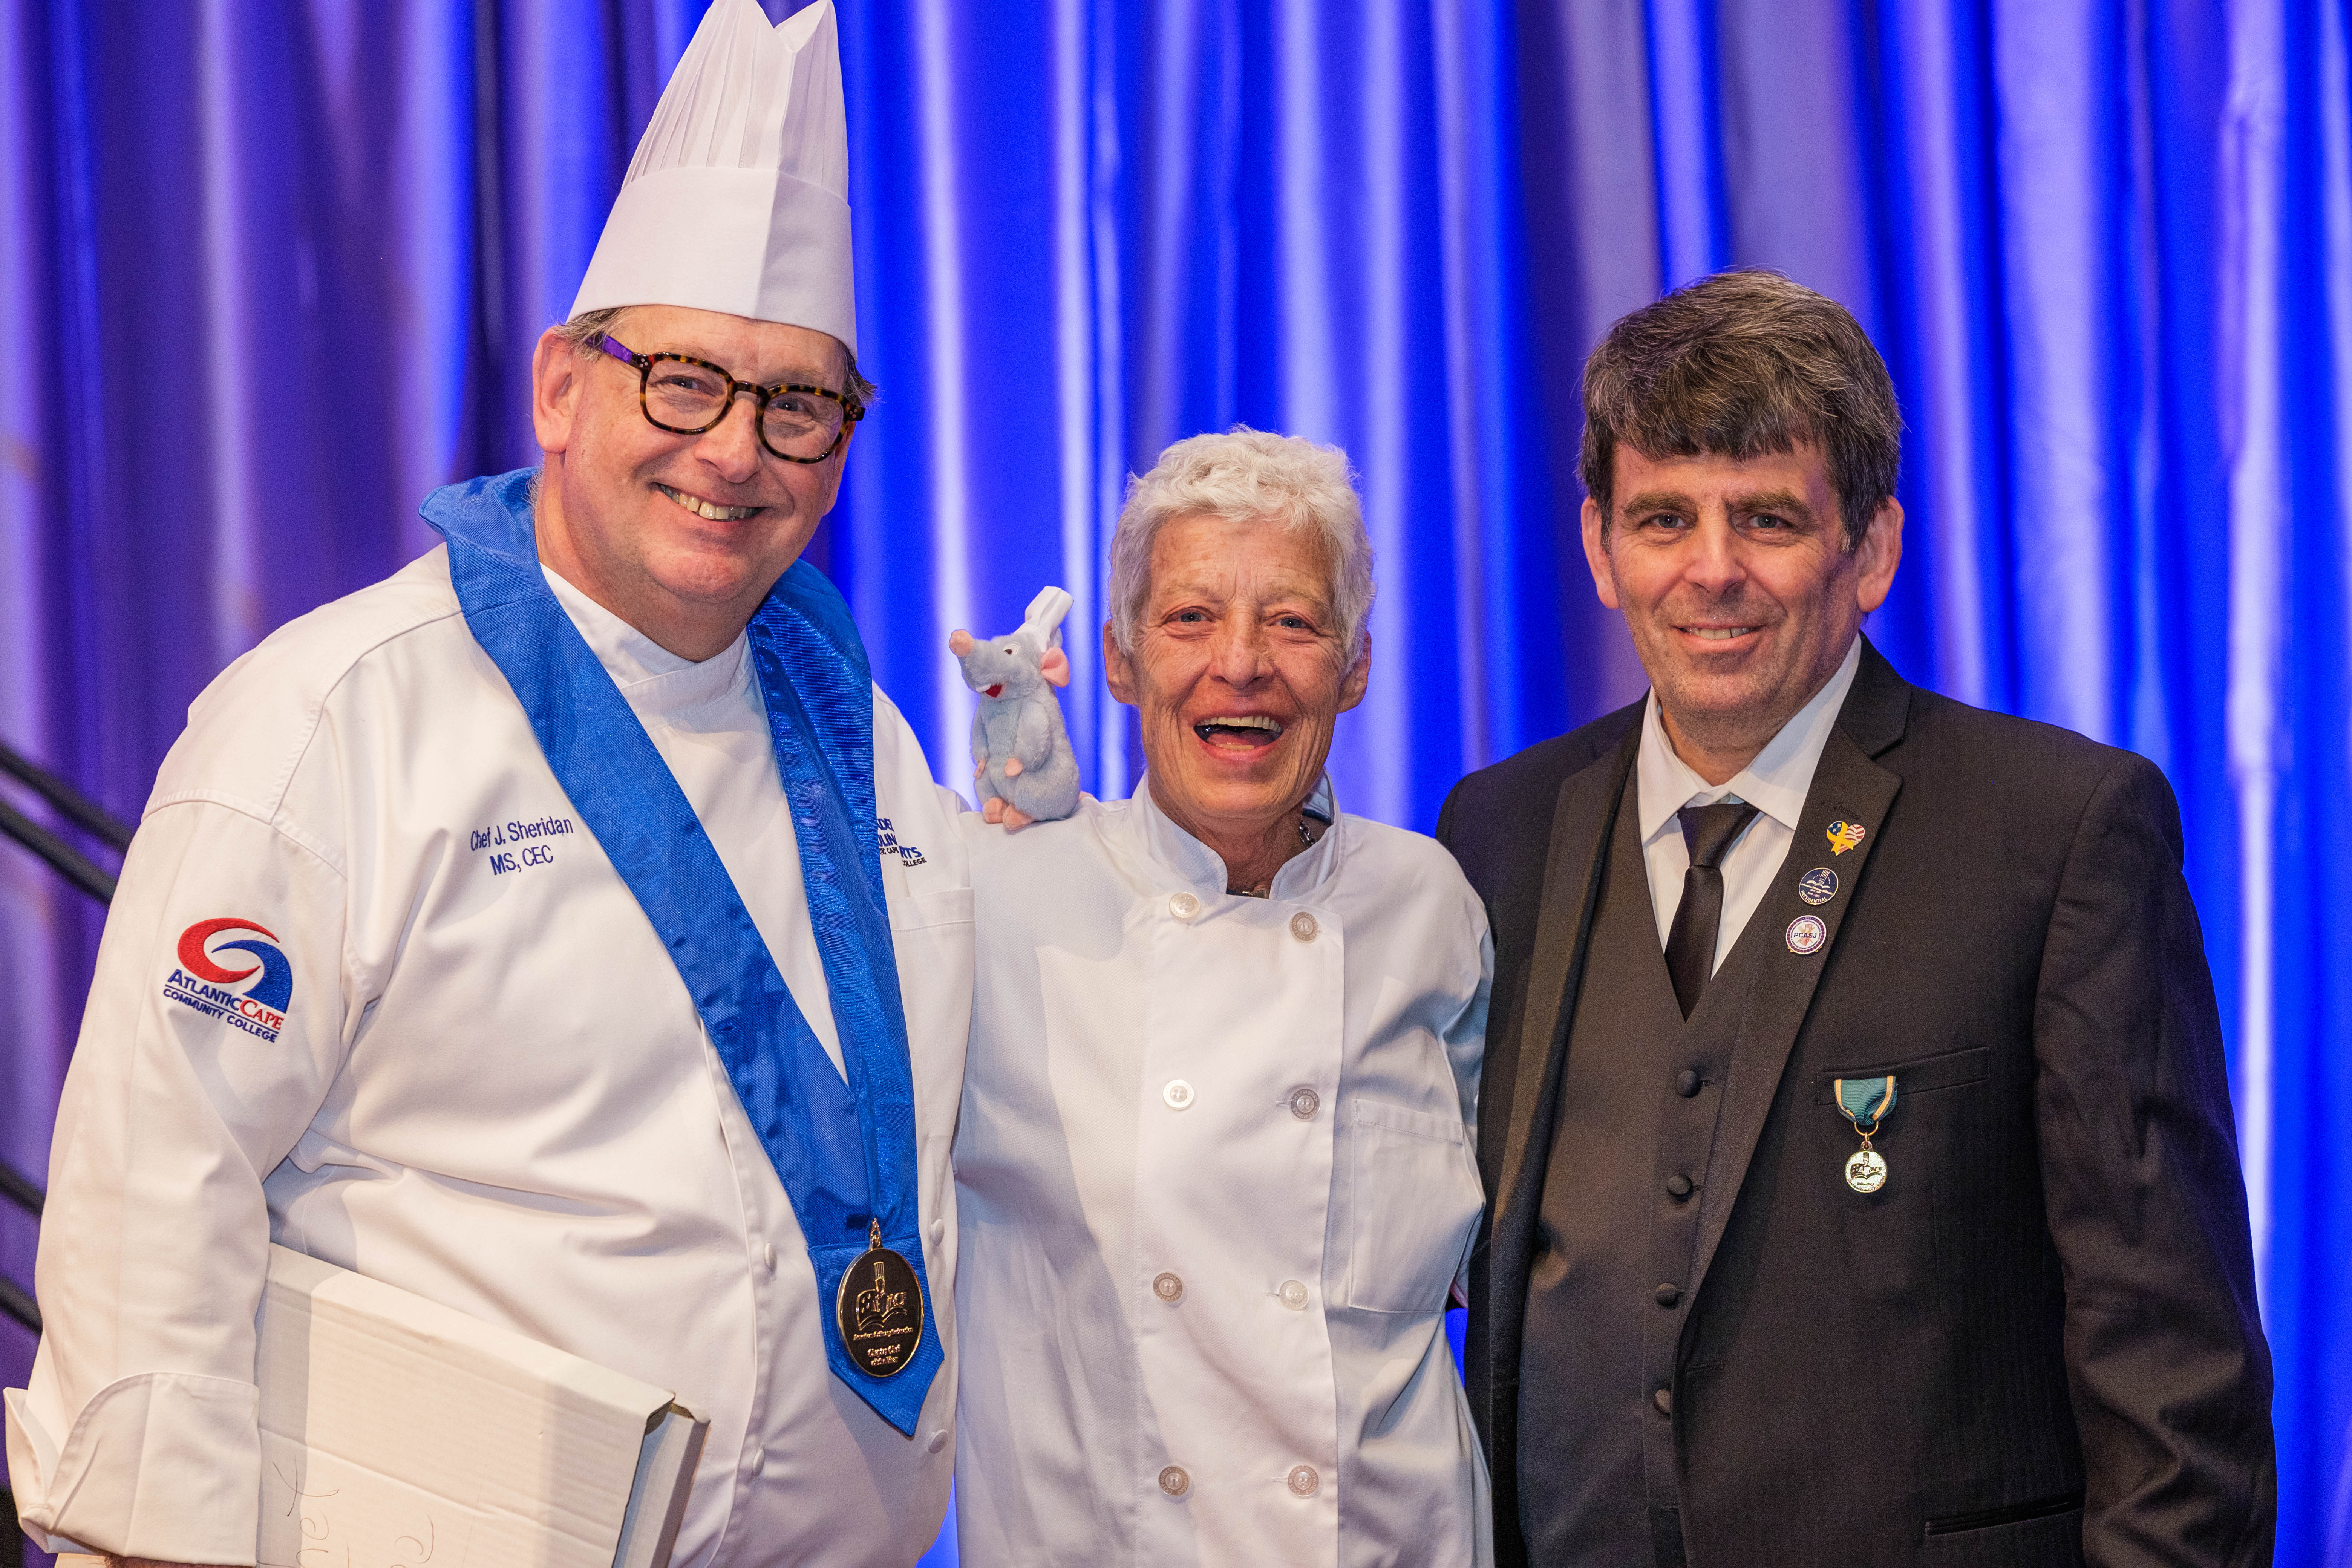 Chef Joseph Sheridan with his wife and David Goldstein